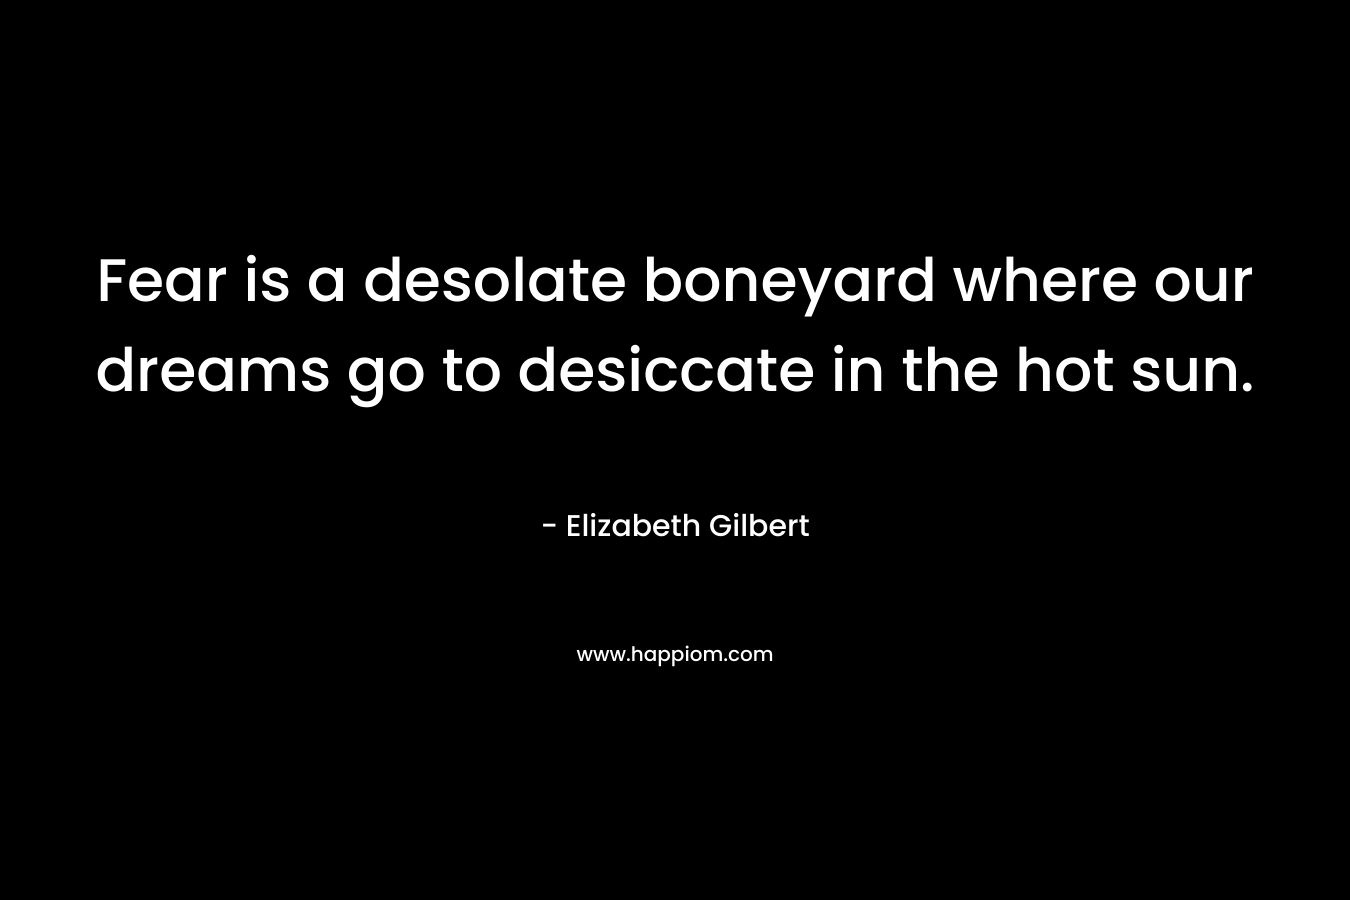 Fear is a desolate boneyard where our dreams go to desiccate in the hot sun.